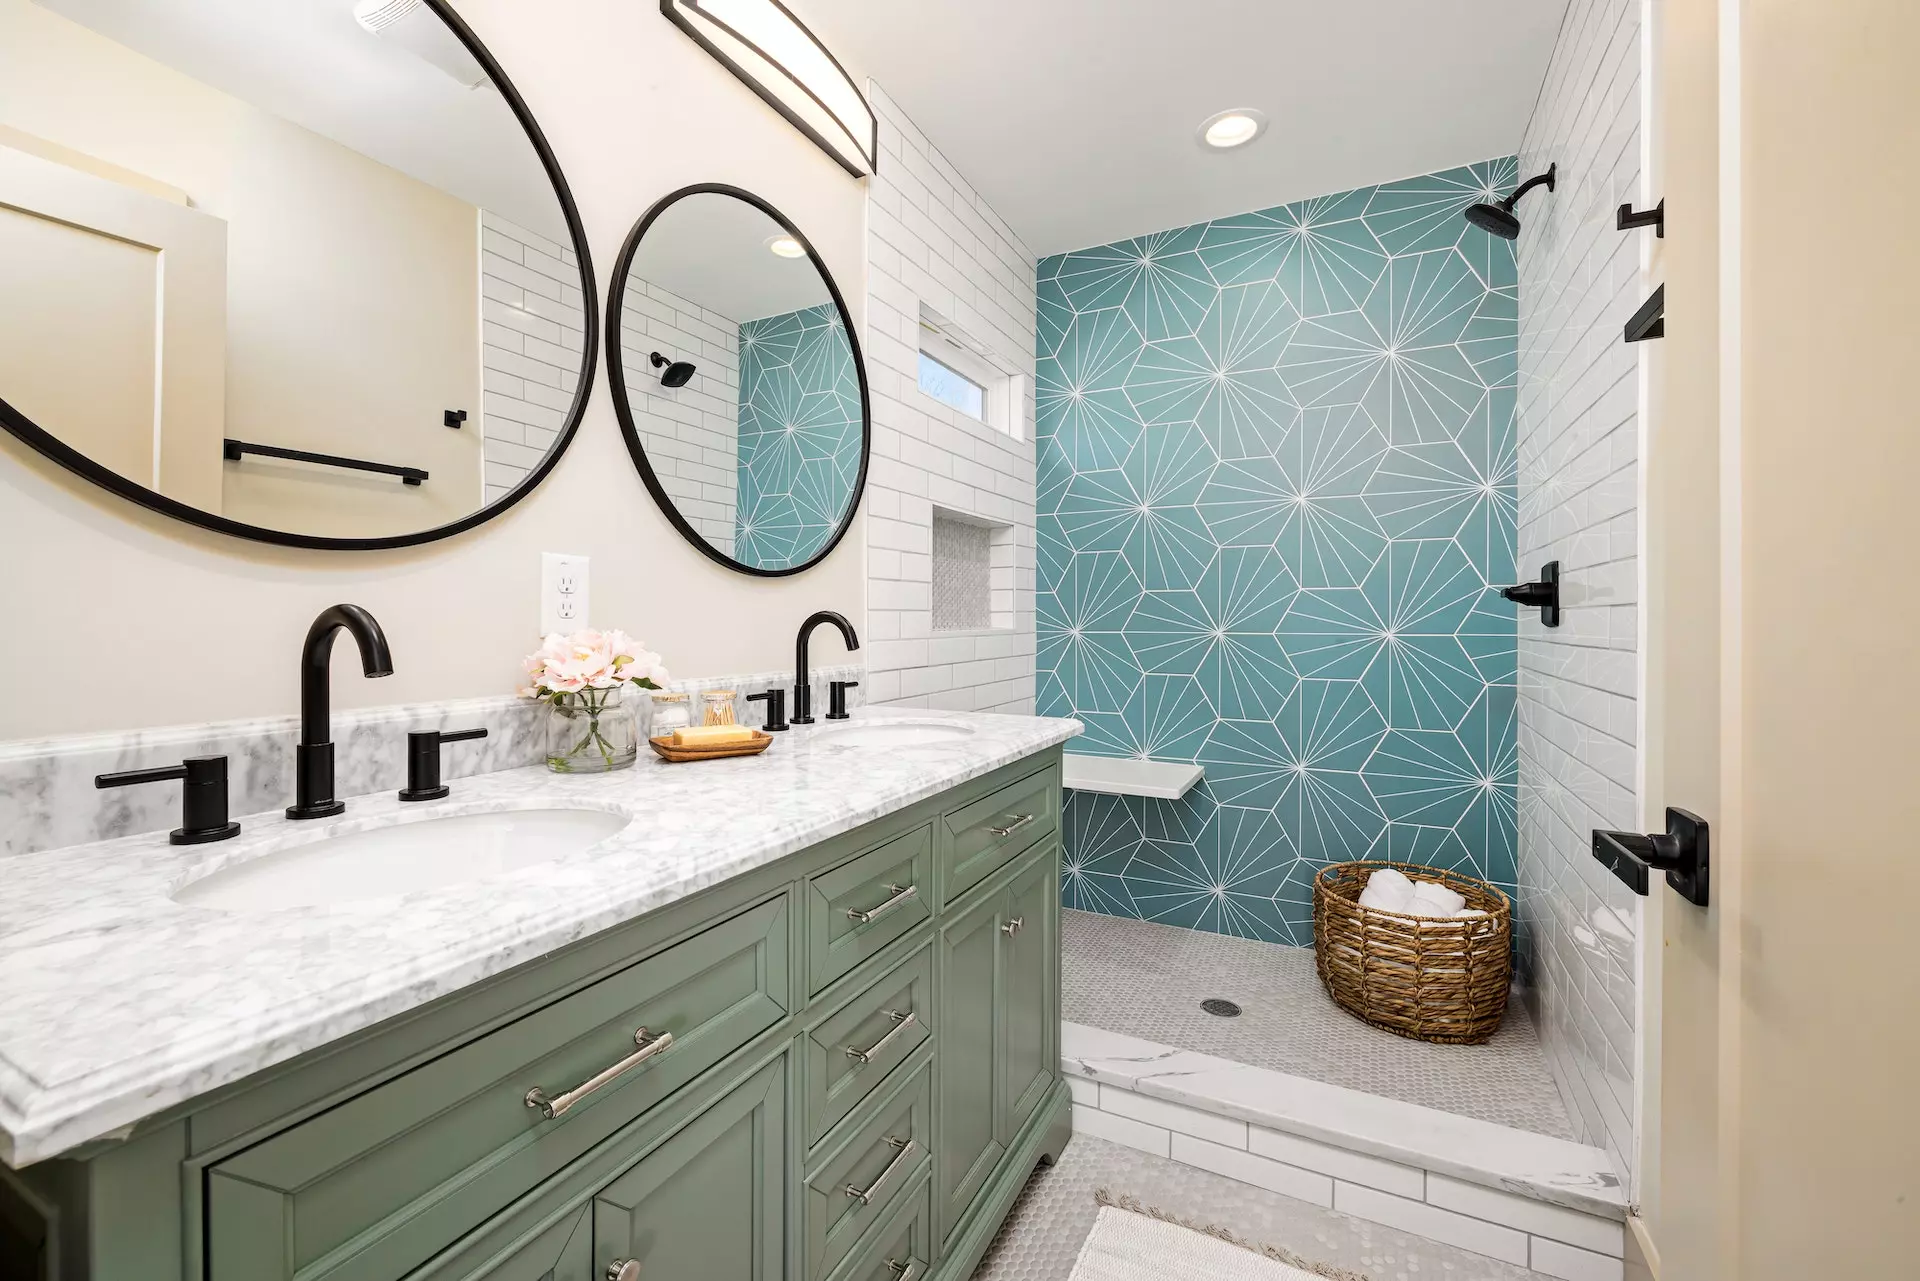 Top 5 Things You Should Know Before Remodeling Your Bathroom?